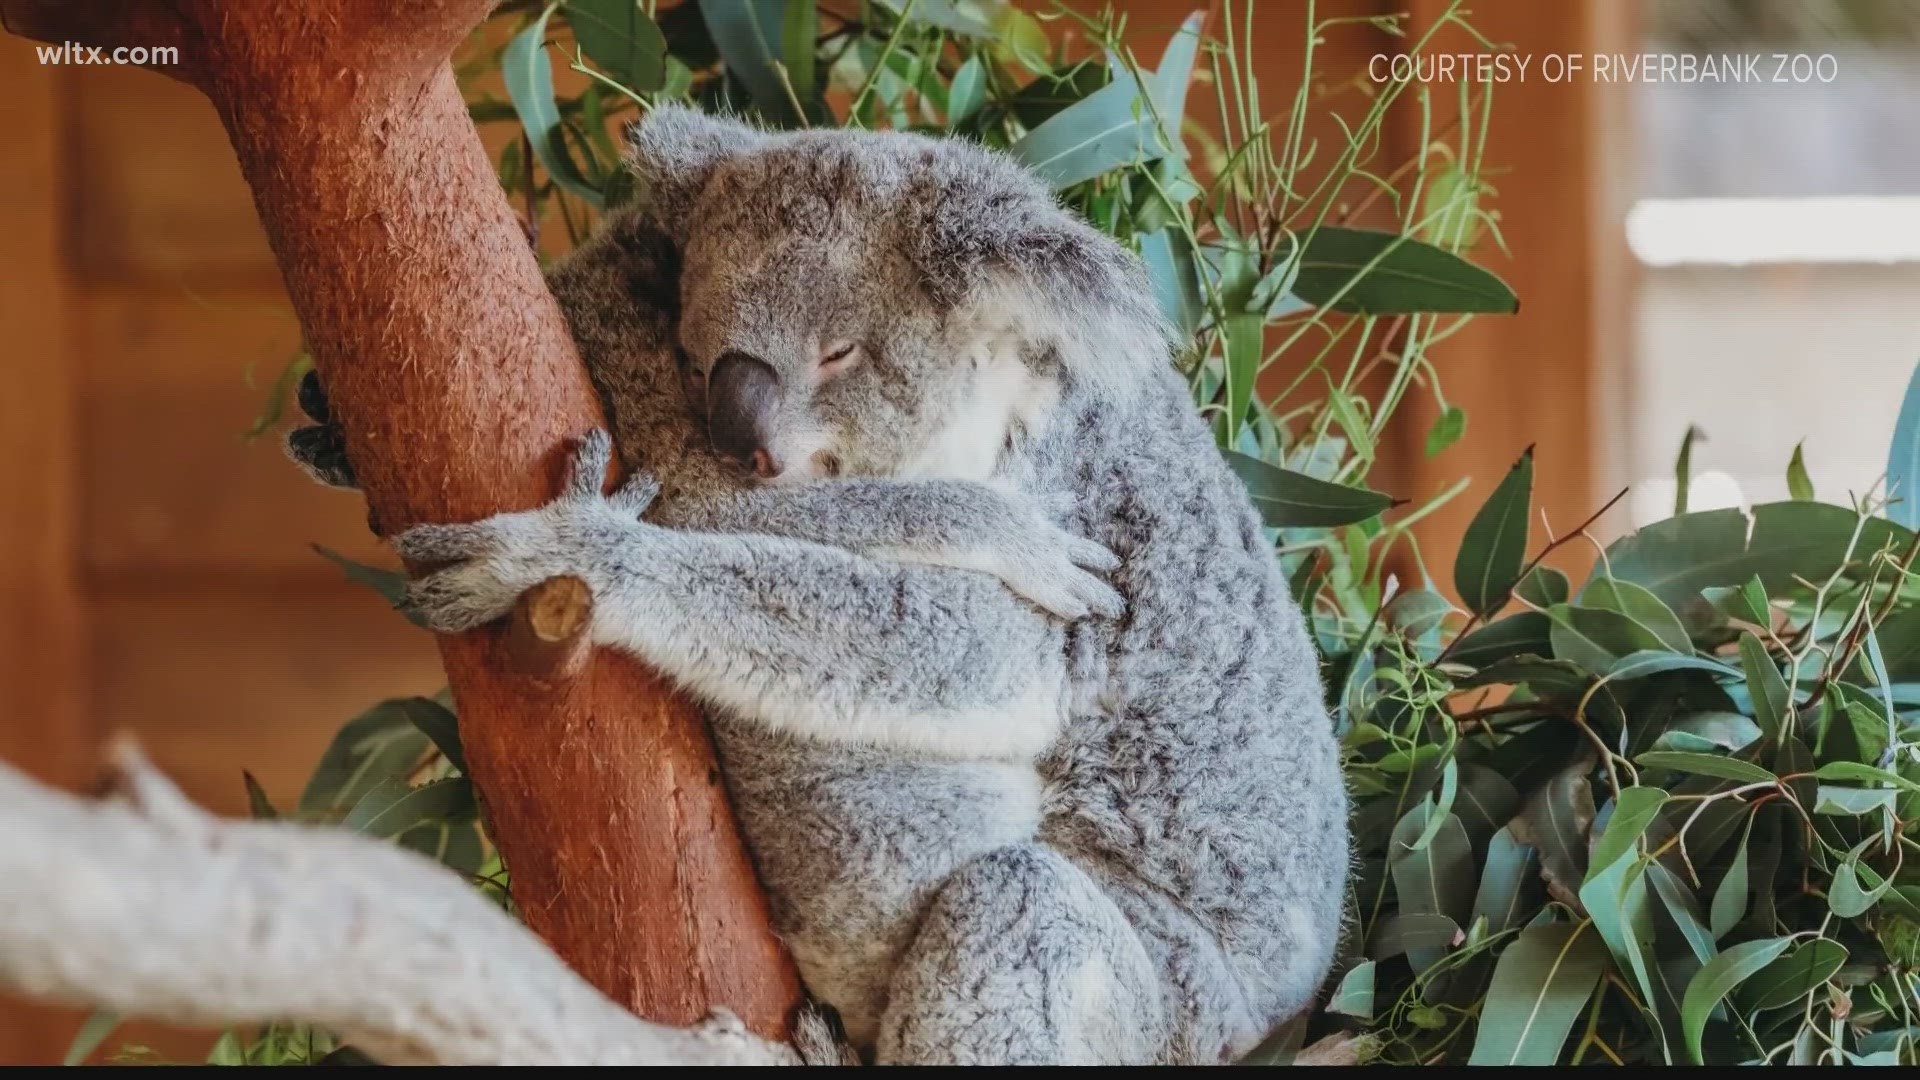 Charlotte, a female koala at Riverbanks Zoo was euthanized after battling a fungal infection.